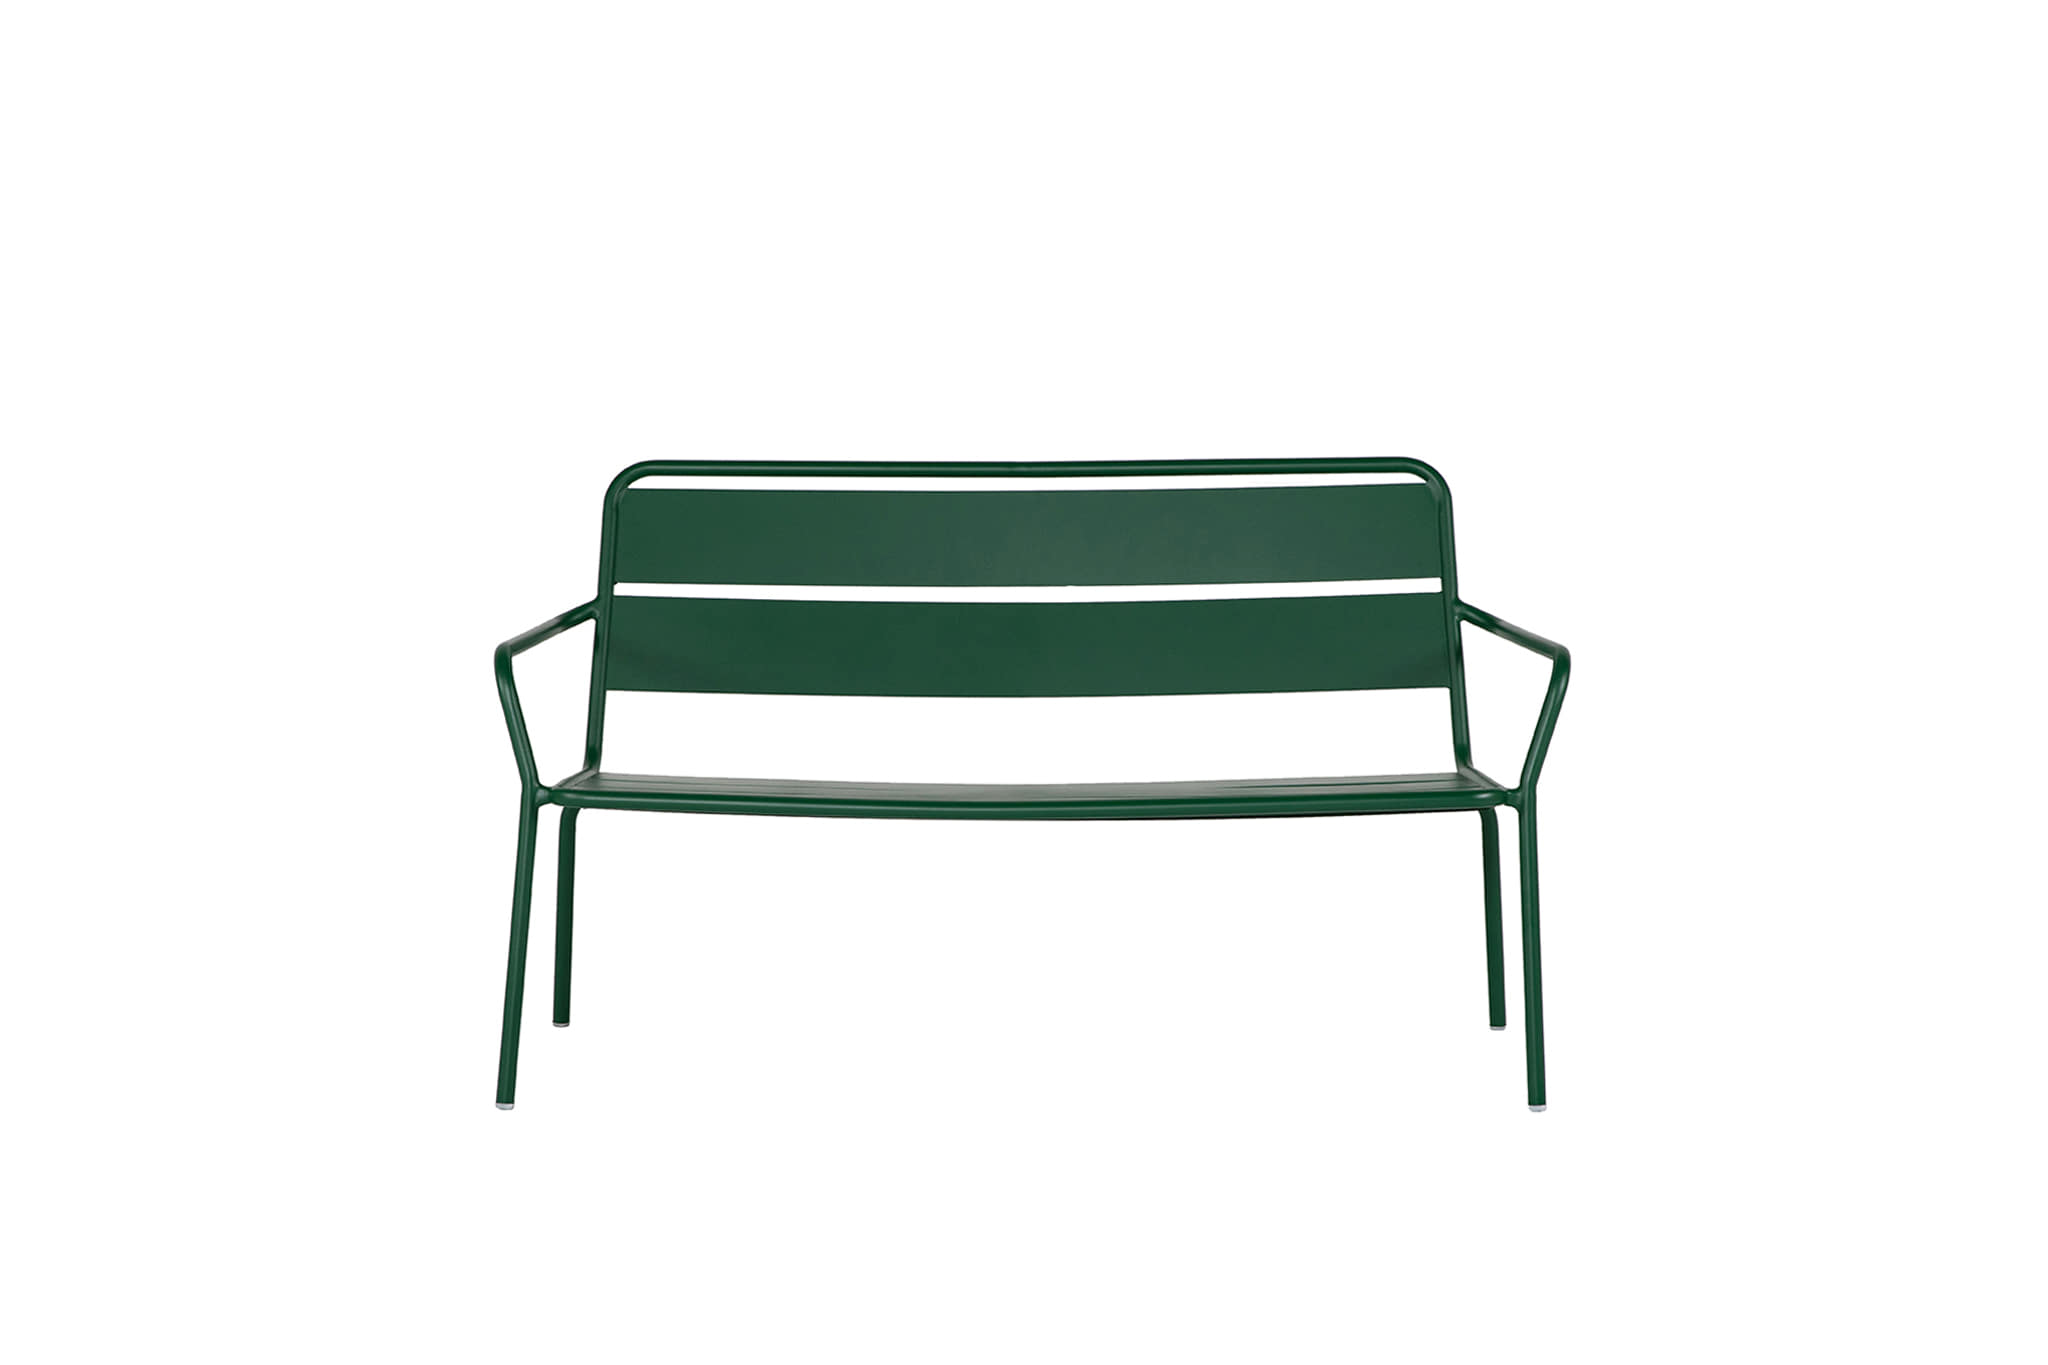 Docent Net_Dosent Net Double Sofa_Forest-Green